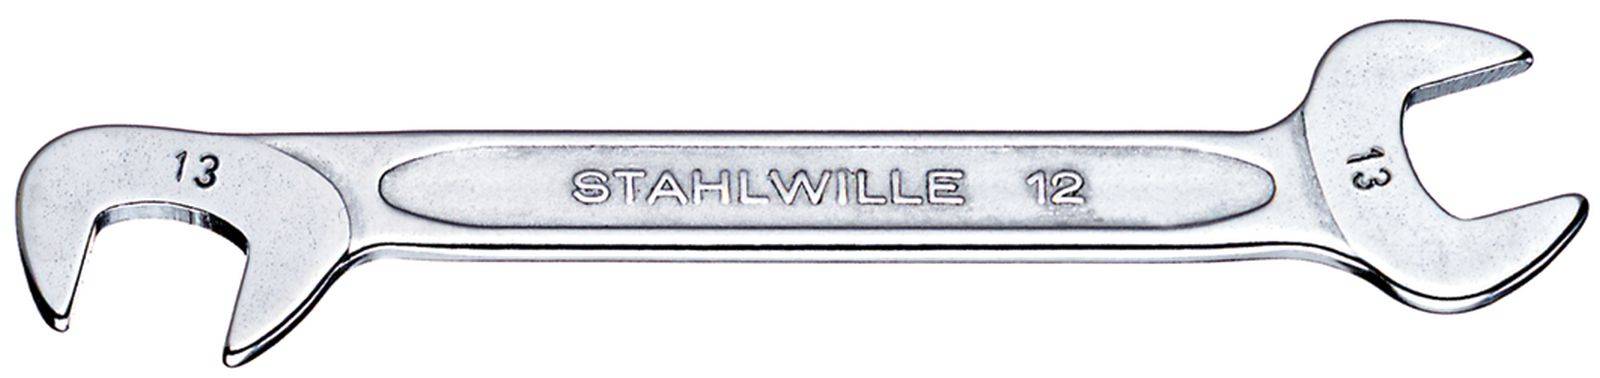 Stahlwille 96411302 Ratchet Ring Wrench Set, Bi Hexagon, Size 9mm x 10mm to  17mm x 19mm, 22 Teeth, Chrome Plated, Straight Design, Thin Walled, 4  Piece: Amazon.com: Industrial & Scientific